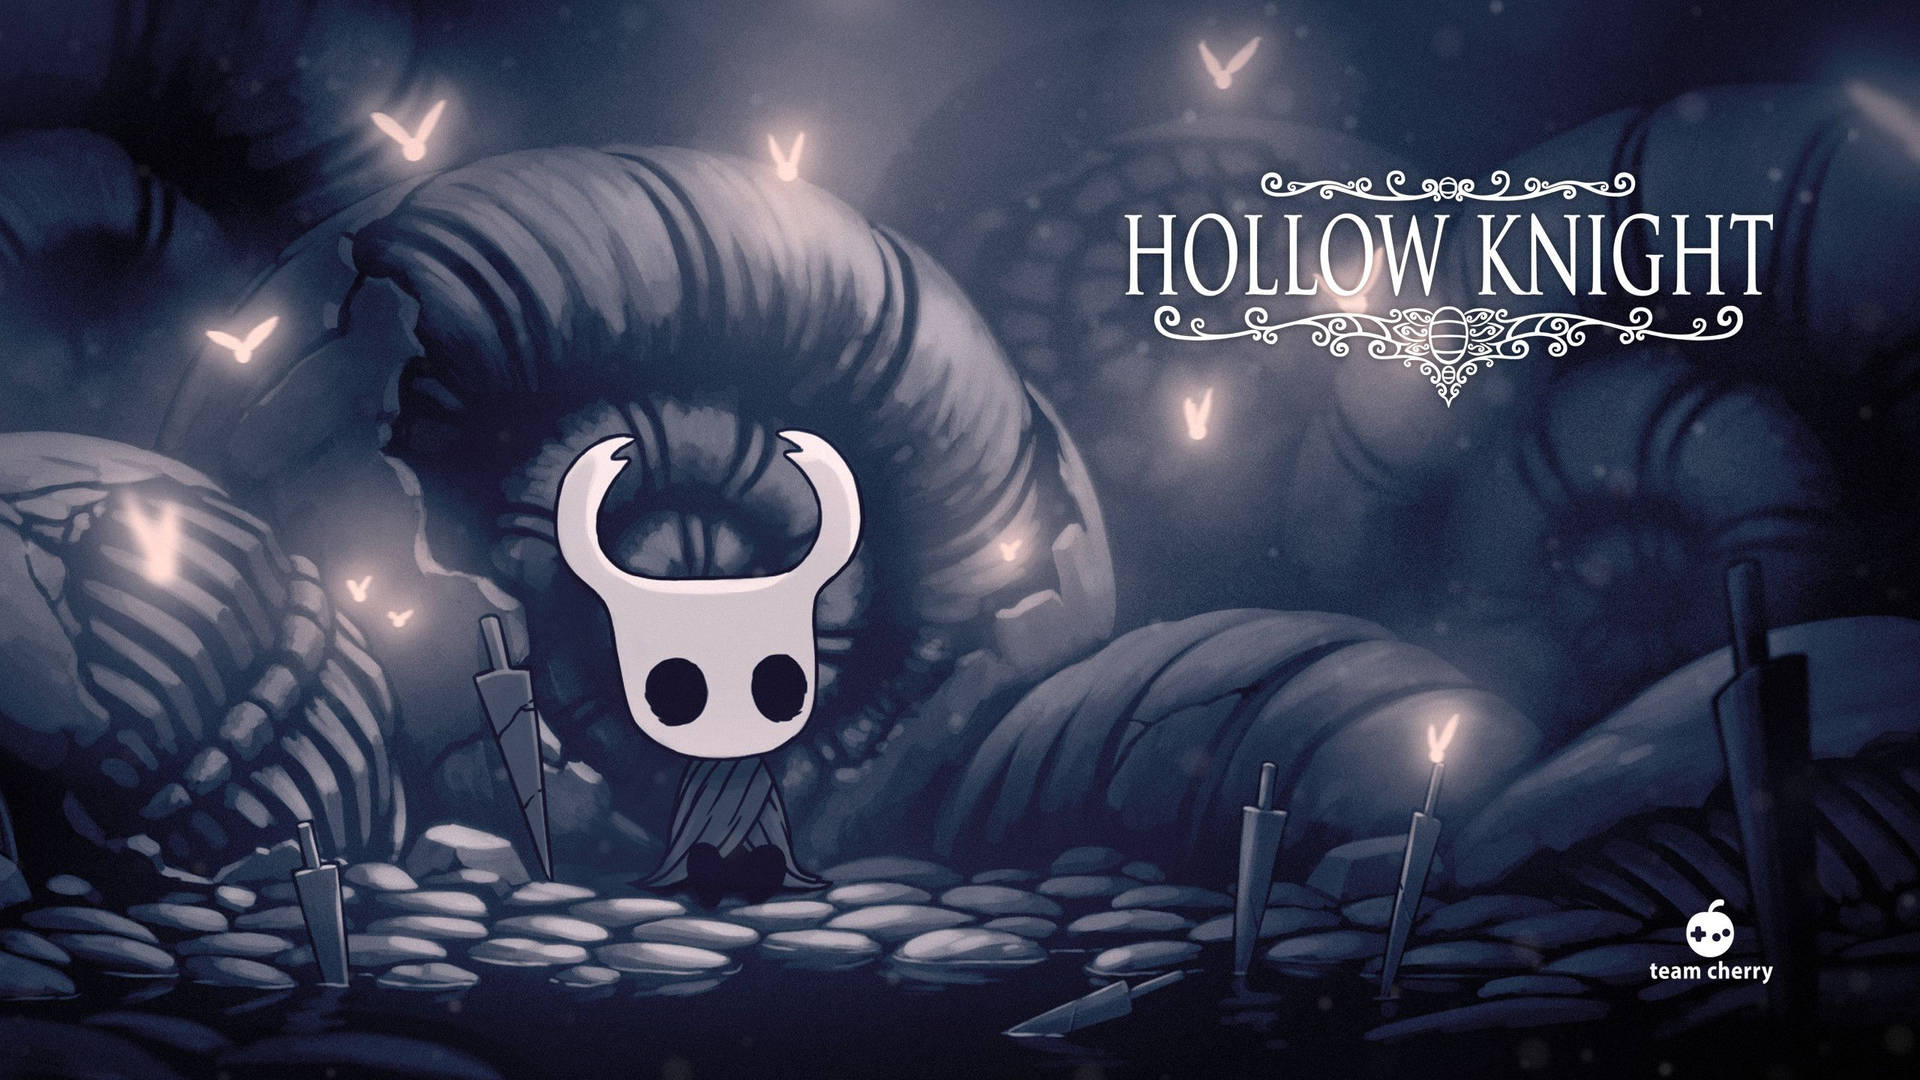 Cool Poster Of Hollow Knight Wallpaper